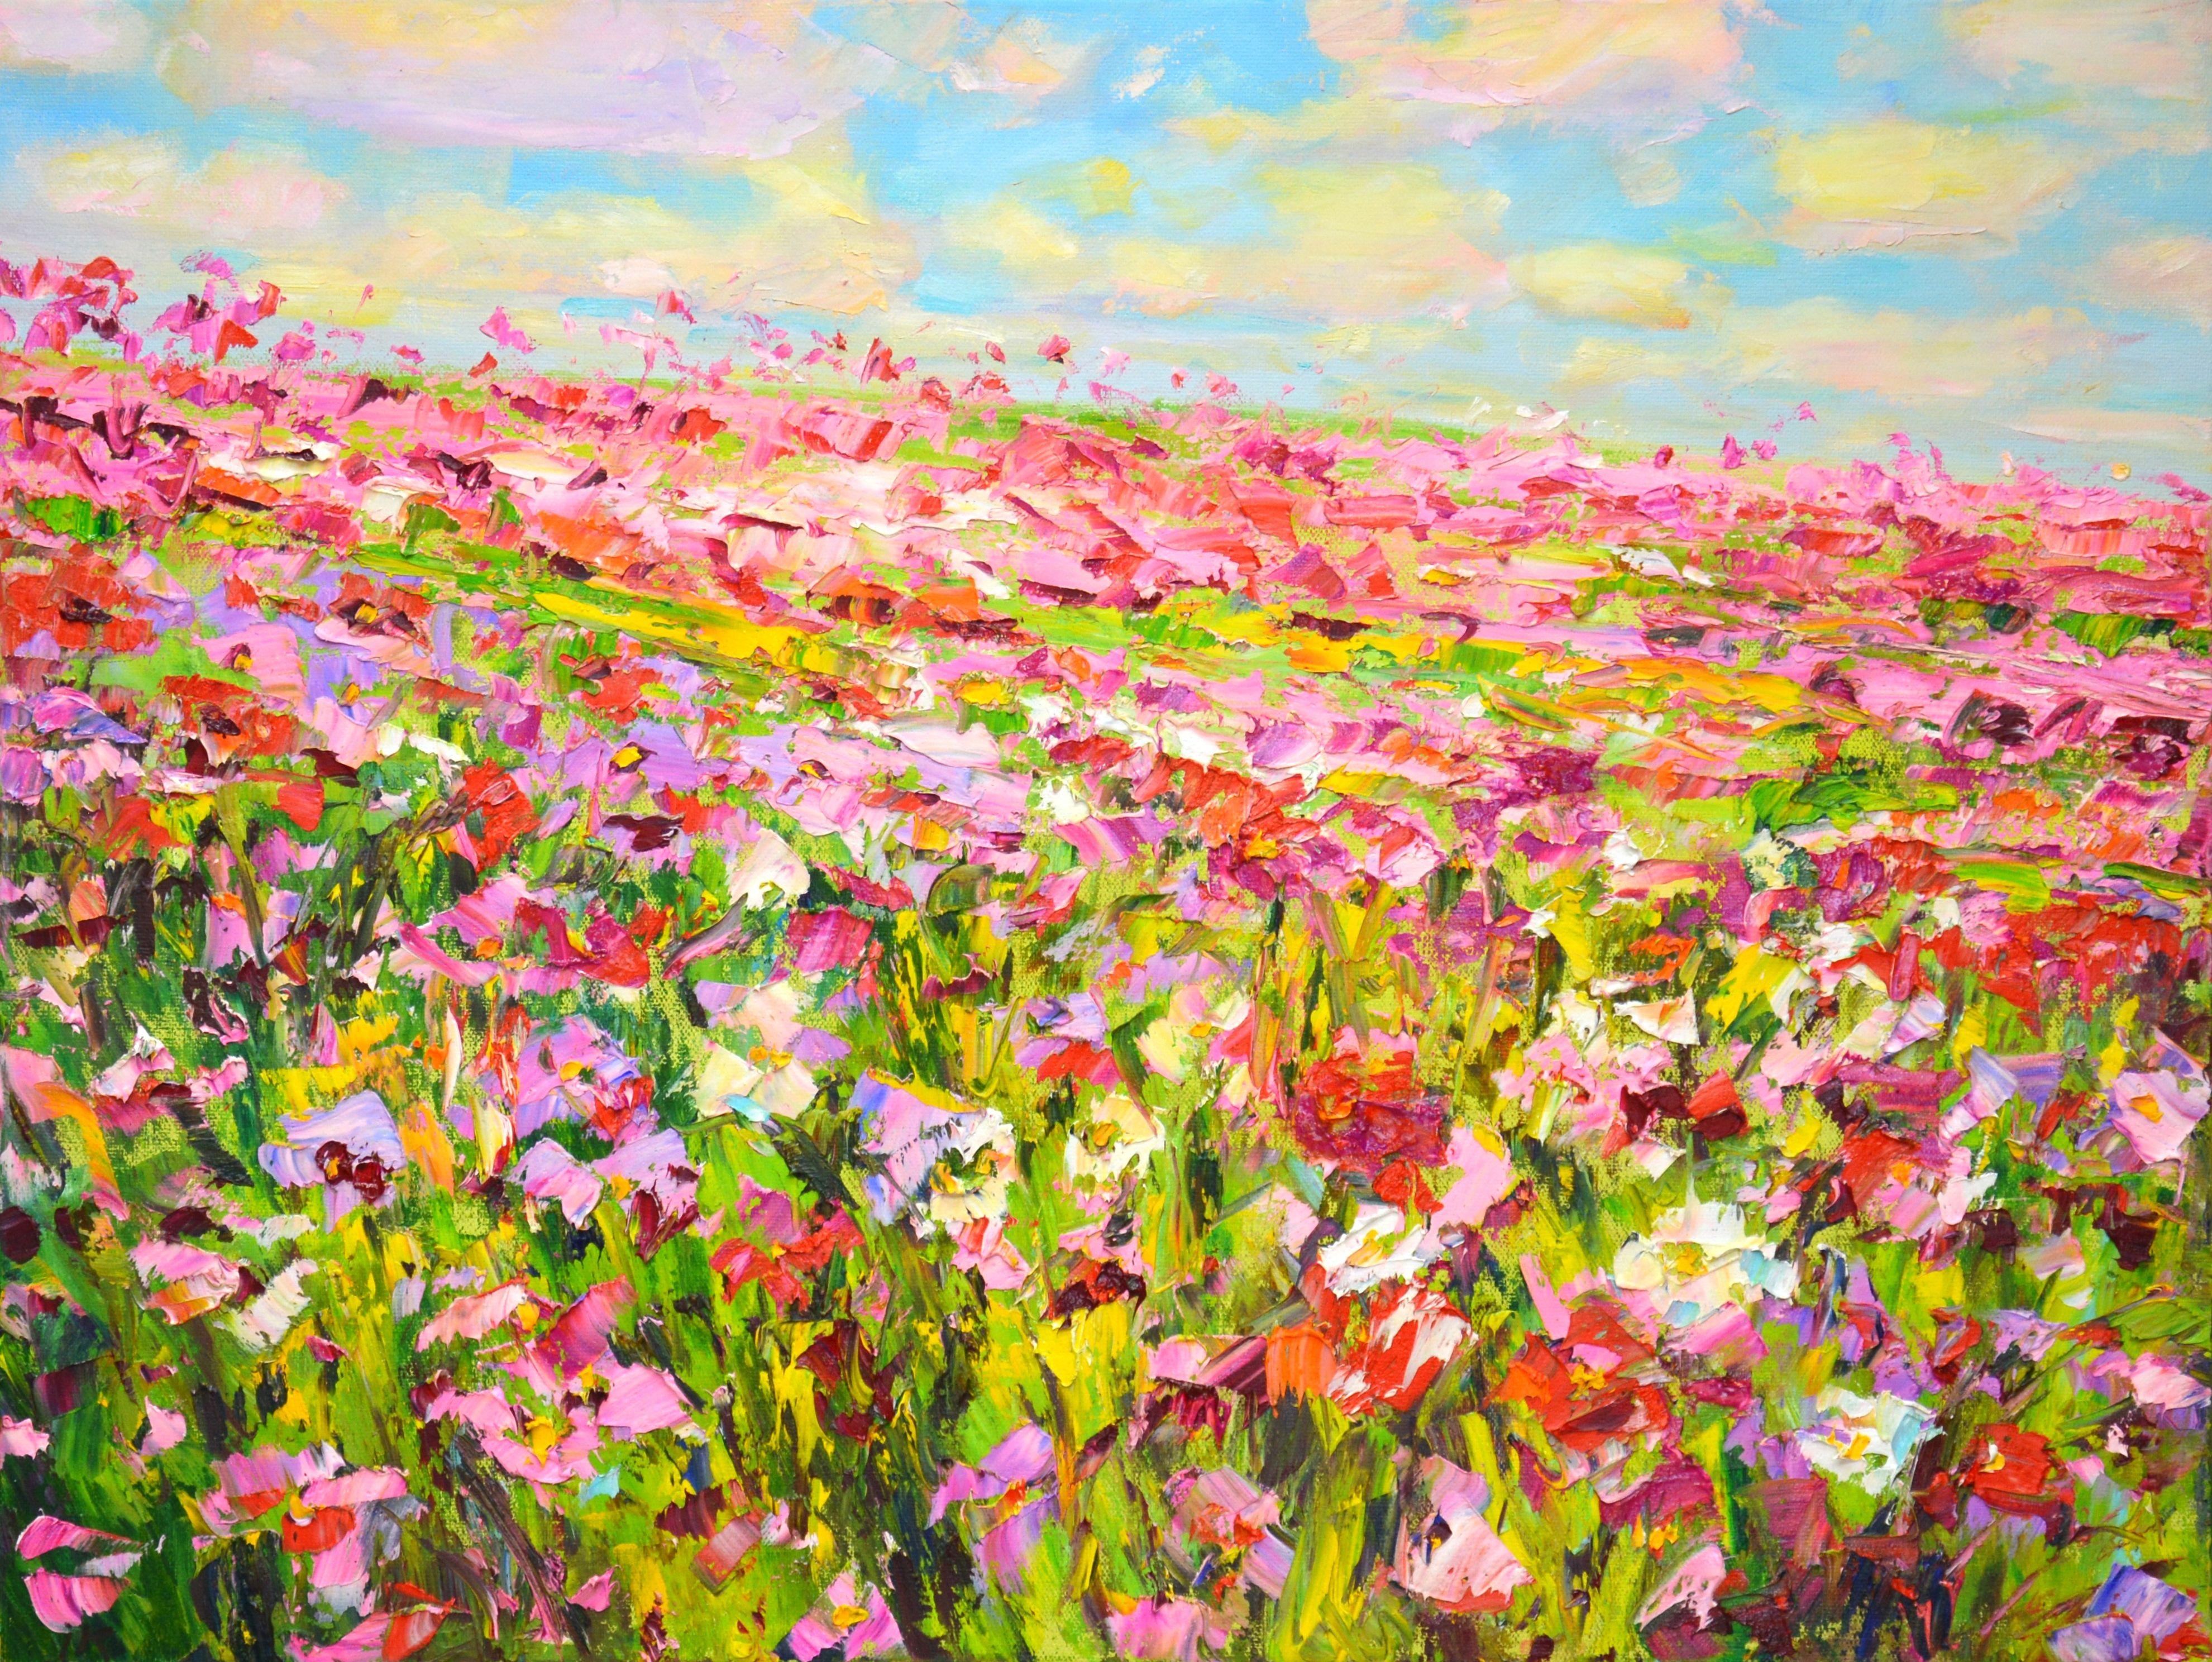 Summer, summer. A sunny summer day, the whole earth is warmed with warmth, a blooming field, flowers, multi-colored poppies, clouds, the sky create an atmosphere of relaxation, harmony, bliss. Impressionism. Nature is an inexhaustible source of